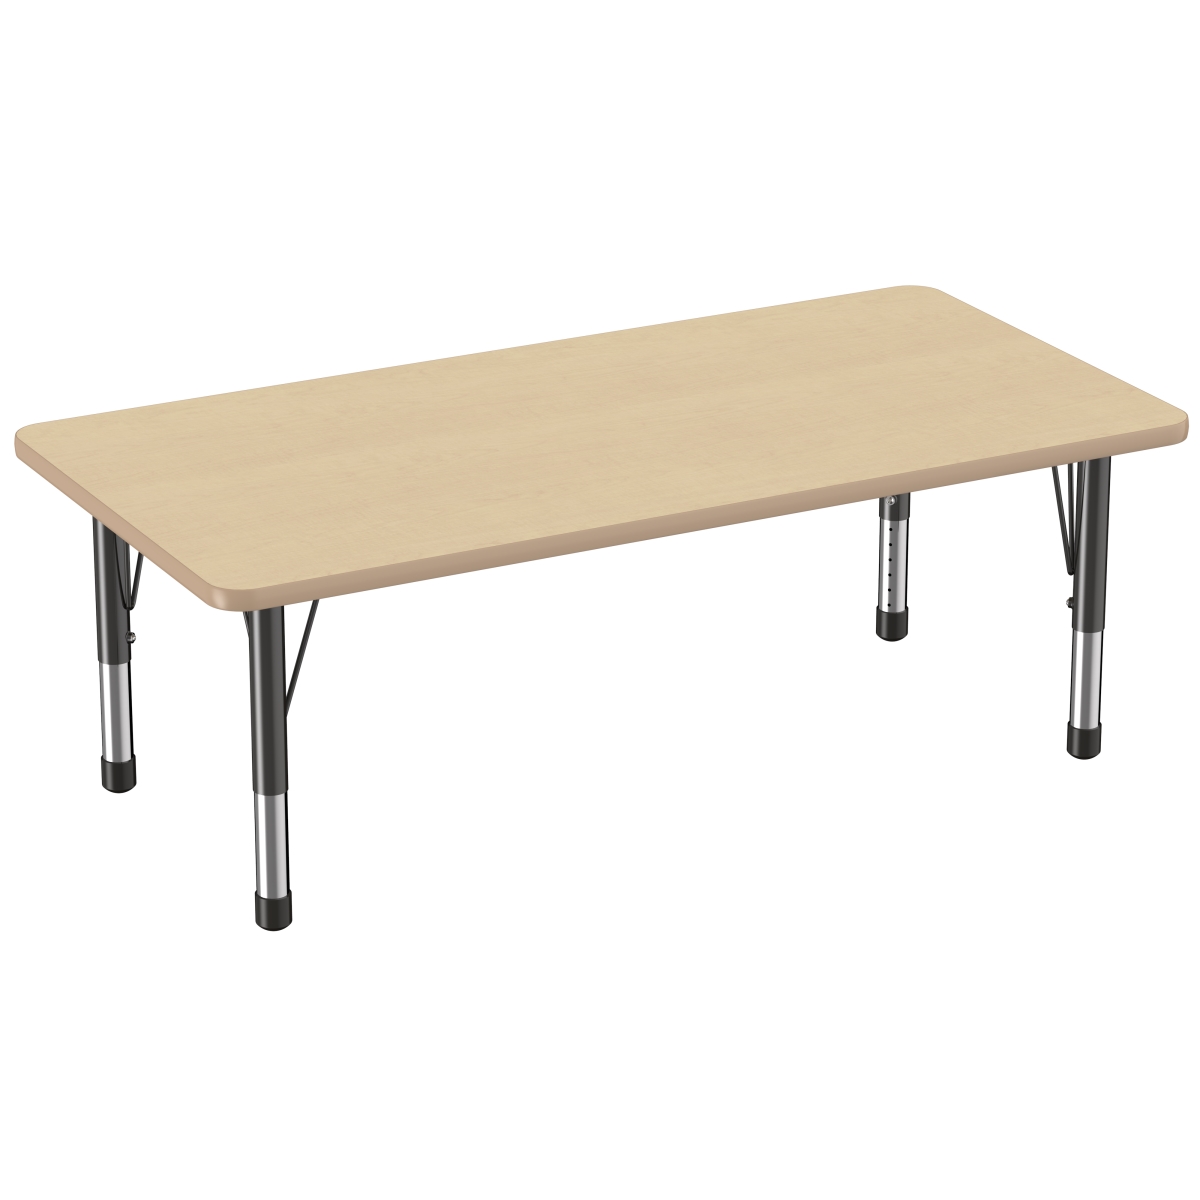 10025-mpmp 30 X 60 In. Rectangle T-mold Adjustable Activity Table With Chunky Leg - Maple